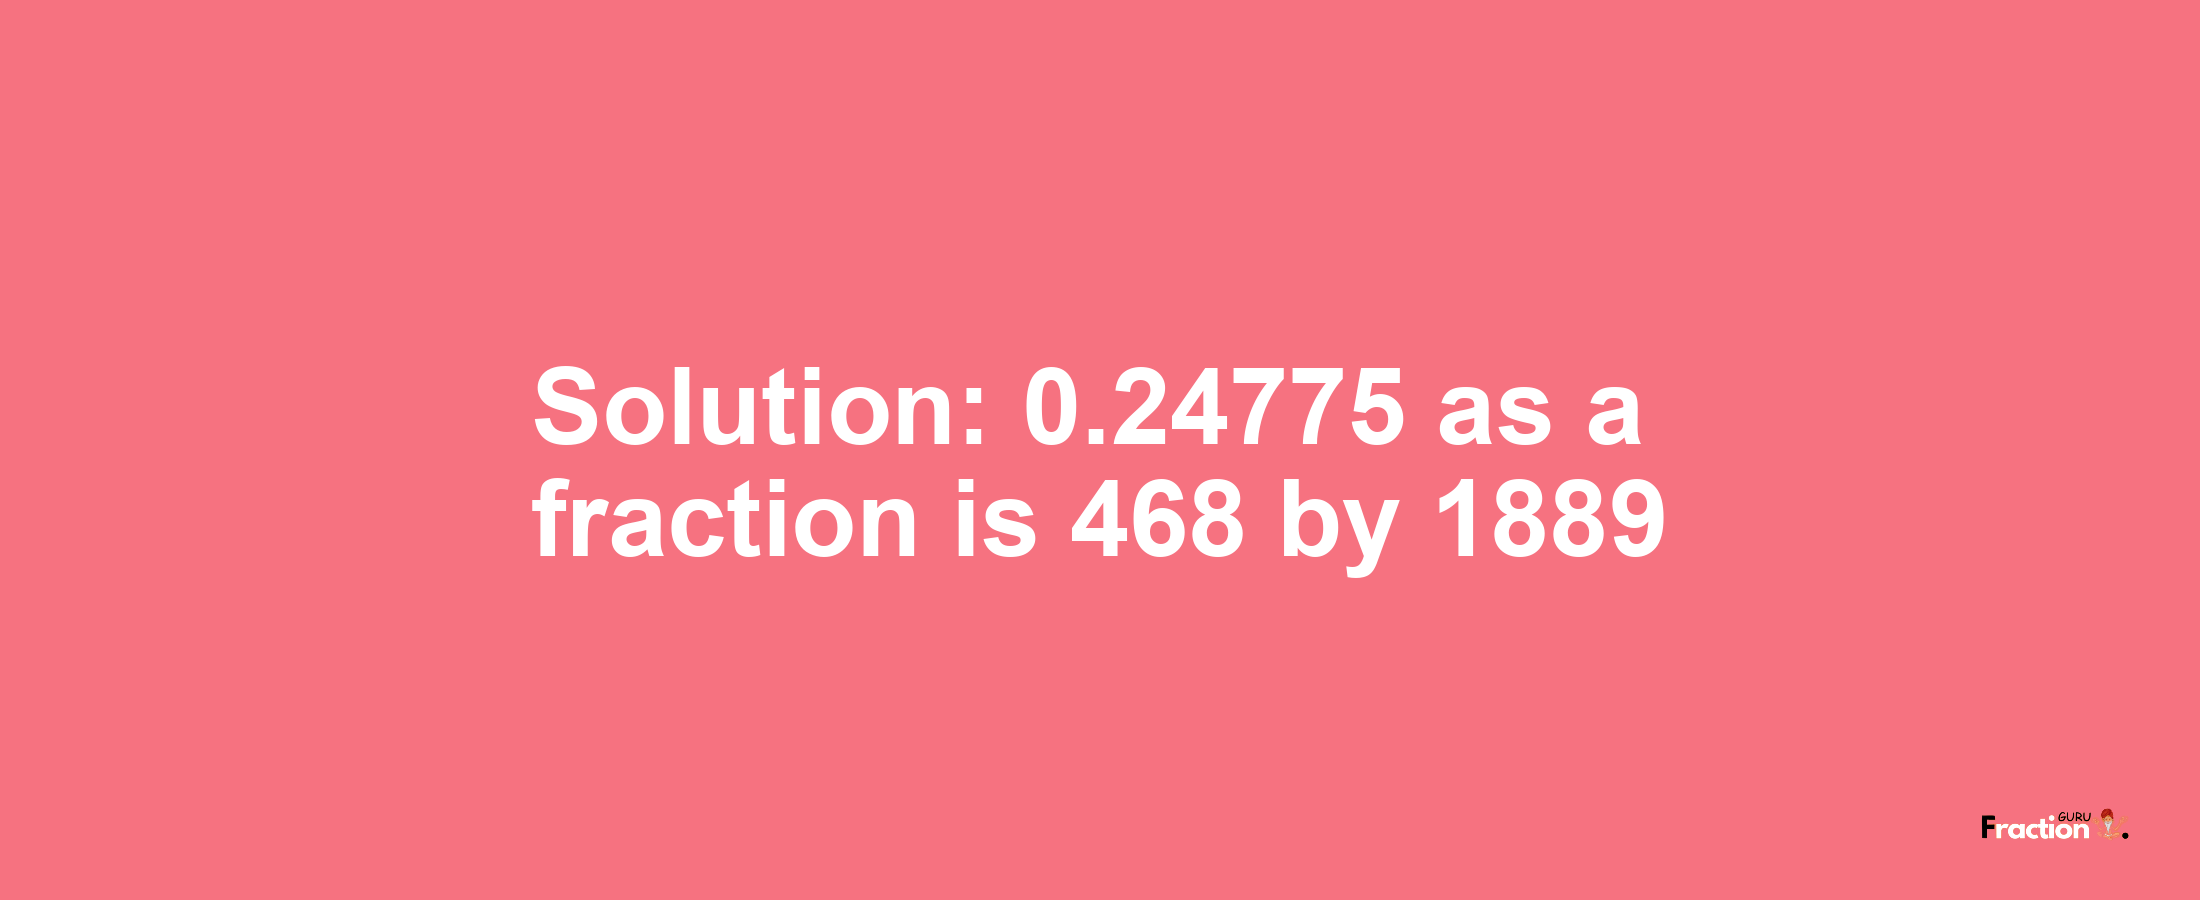 Solution:0.24775 as a fraction is 468/1889